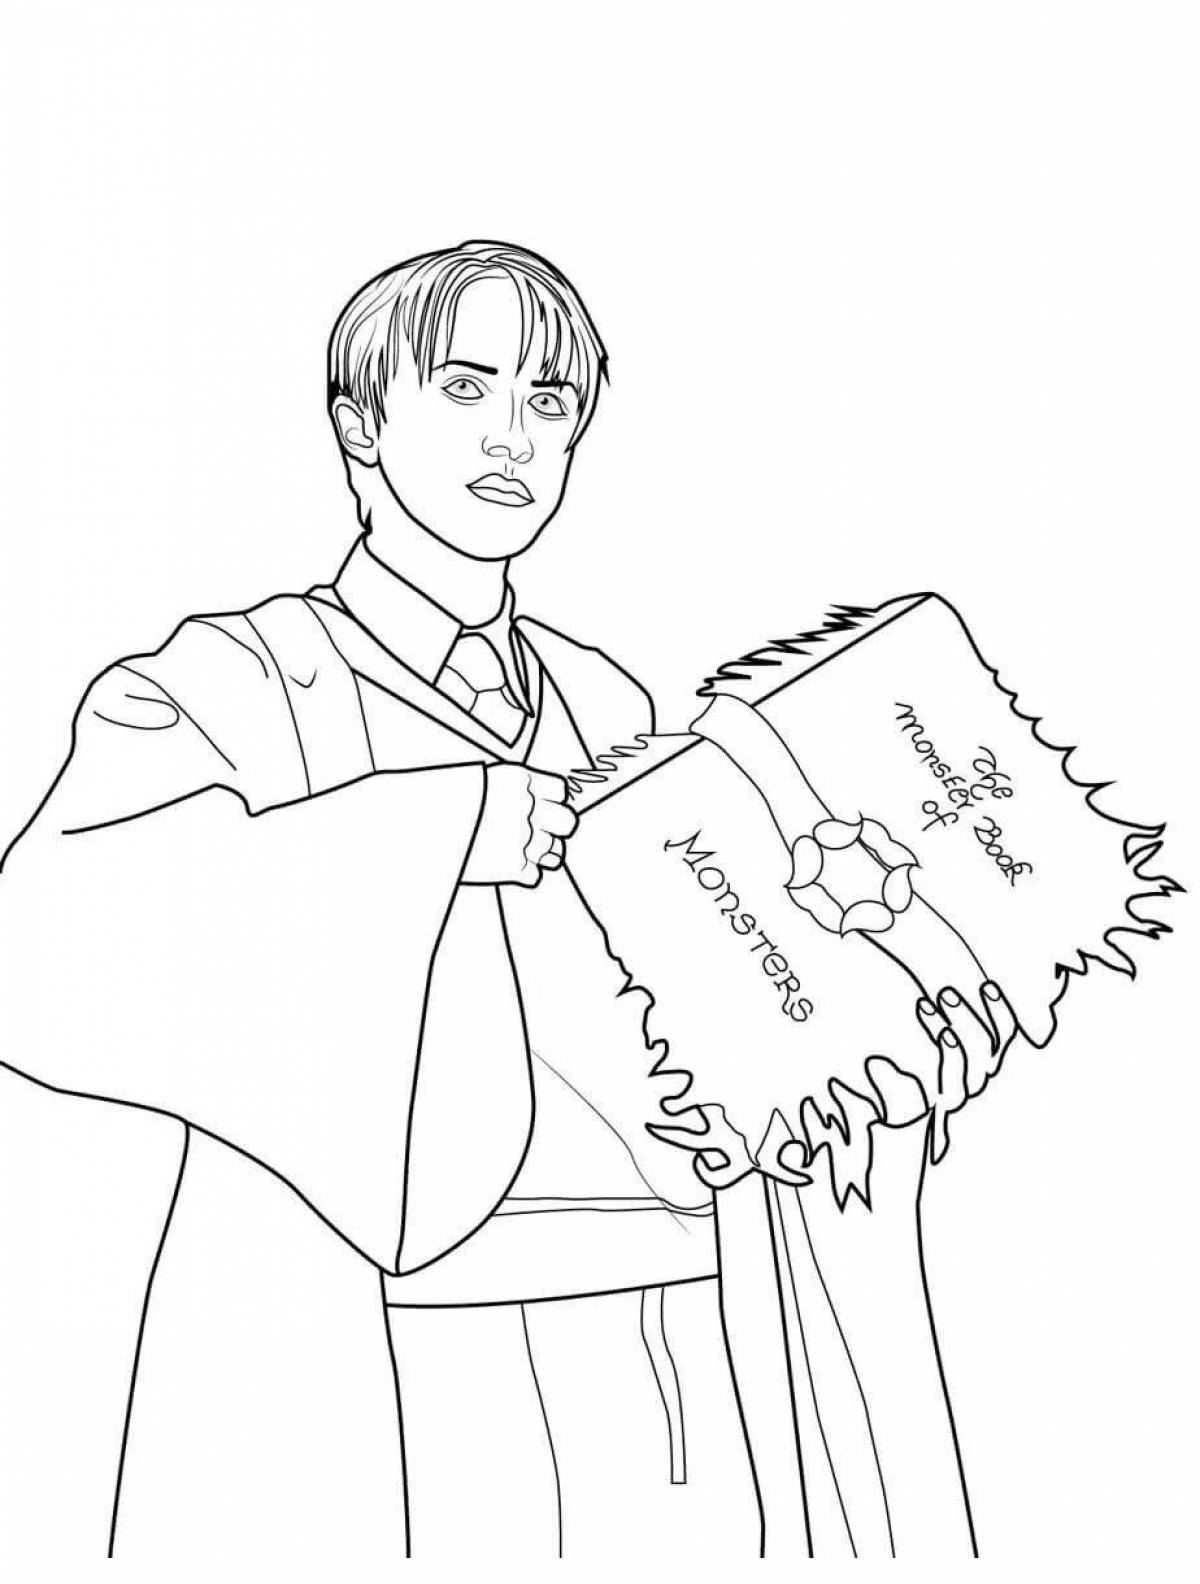 Majestic tom riddle coloring book